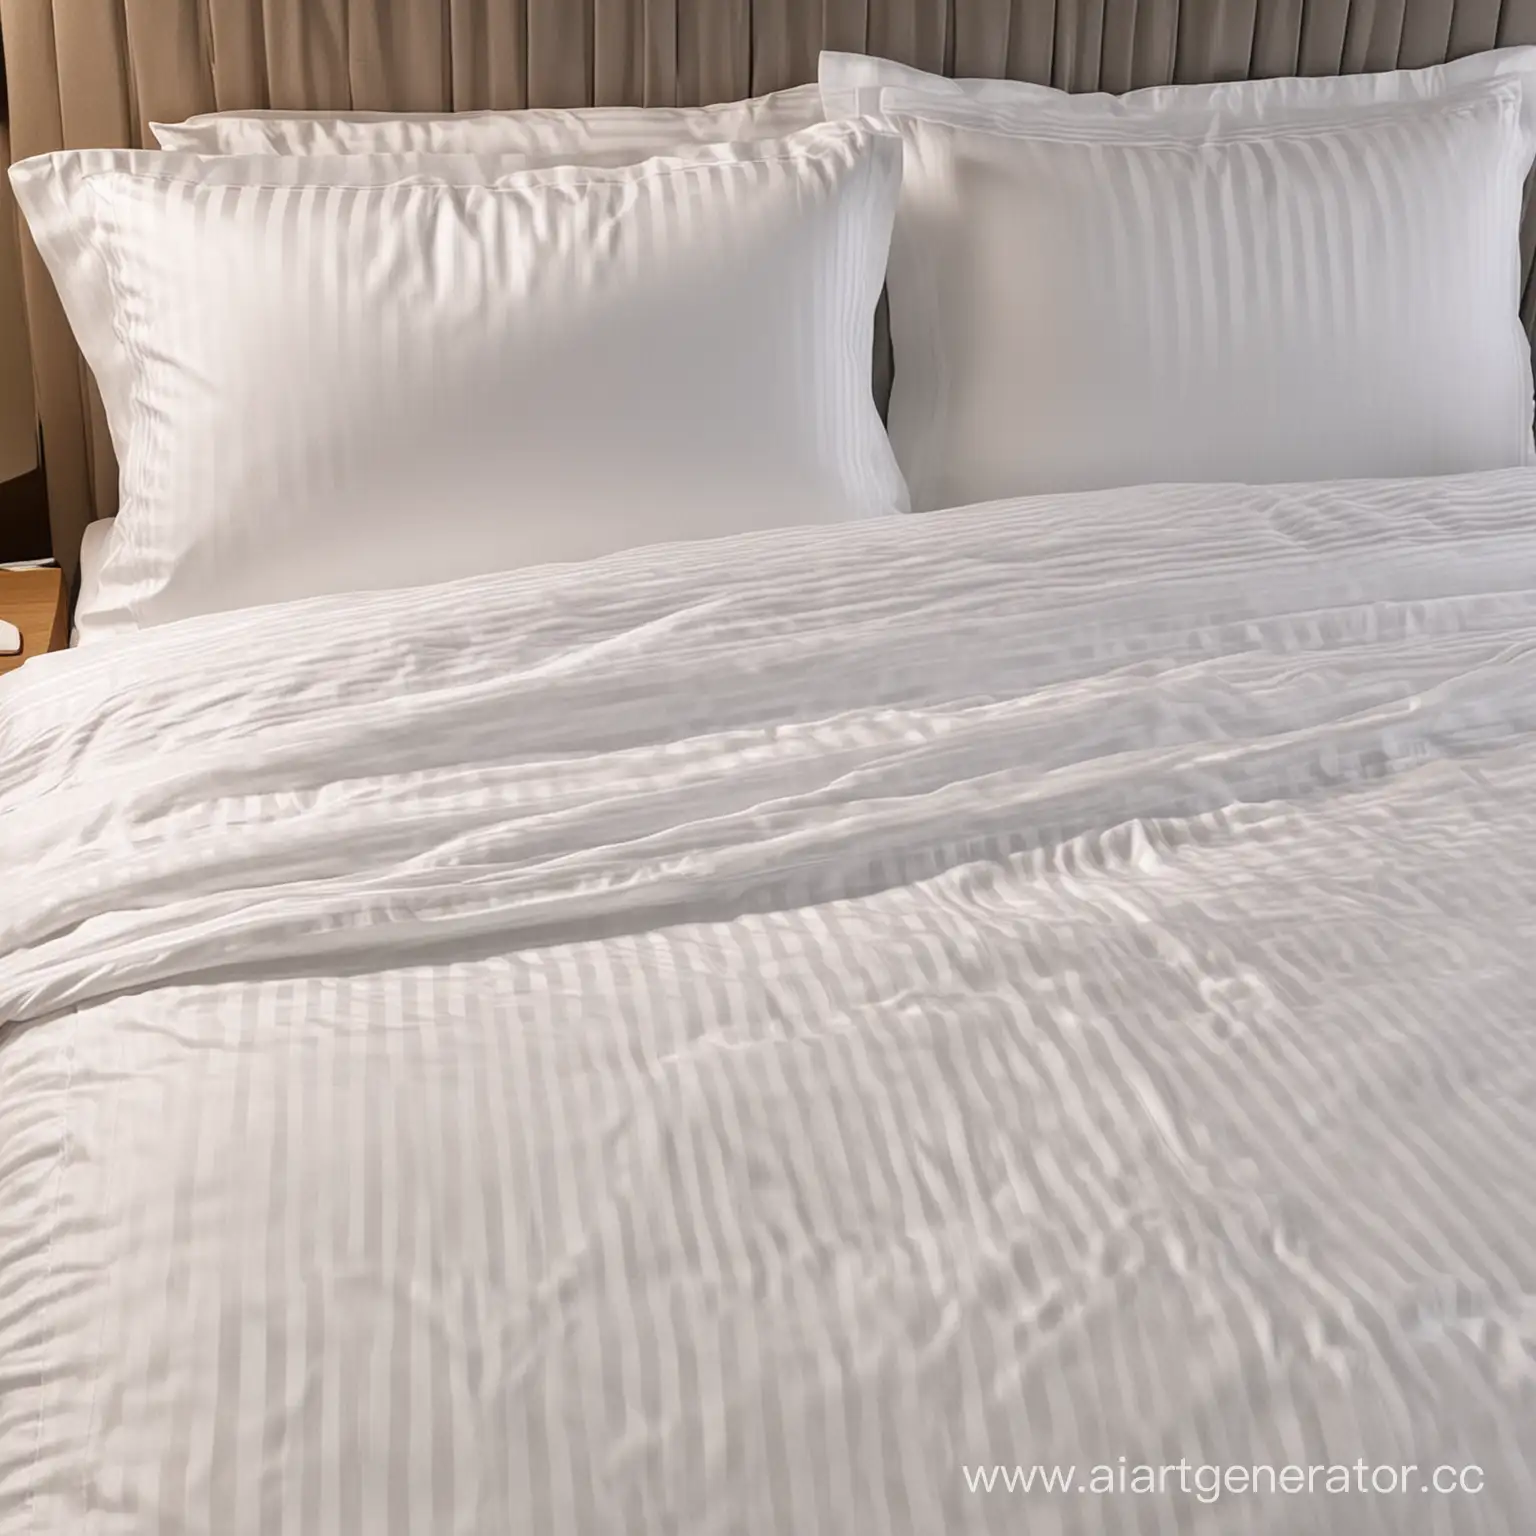 Luxurious-Hotel-Room-Bed-with-SatinStripe-White-Linen